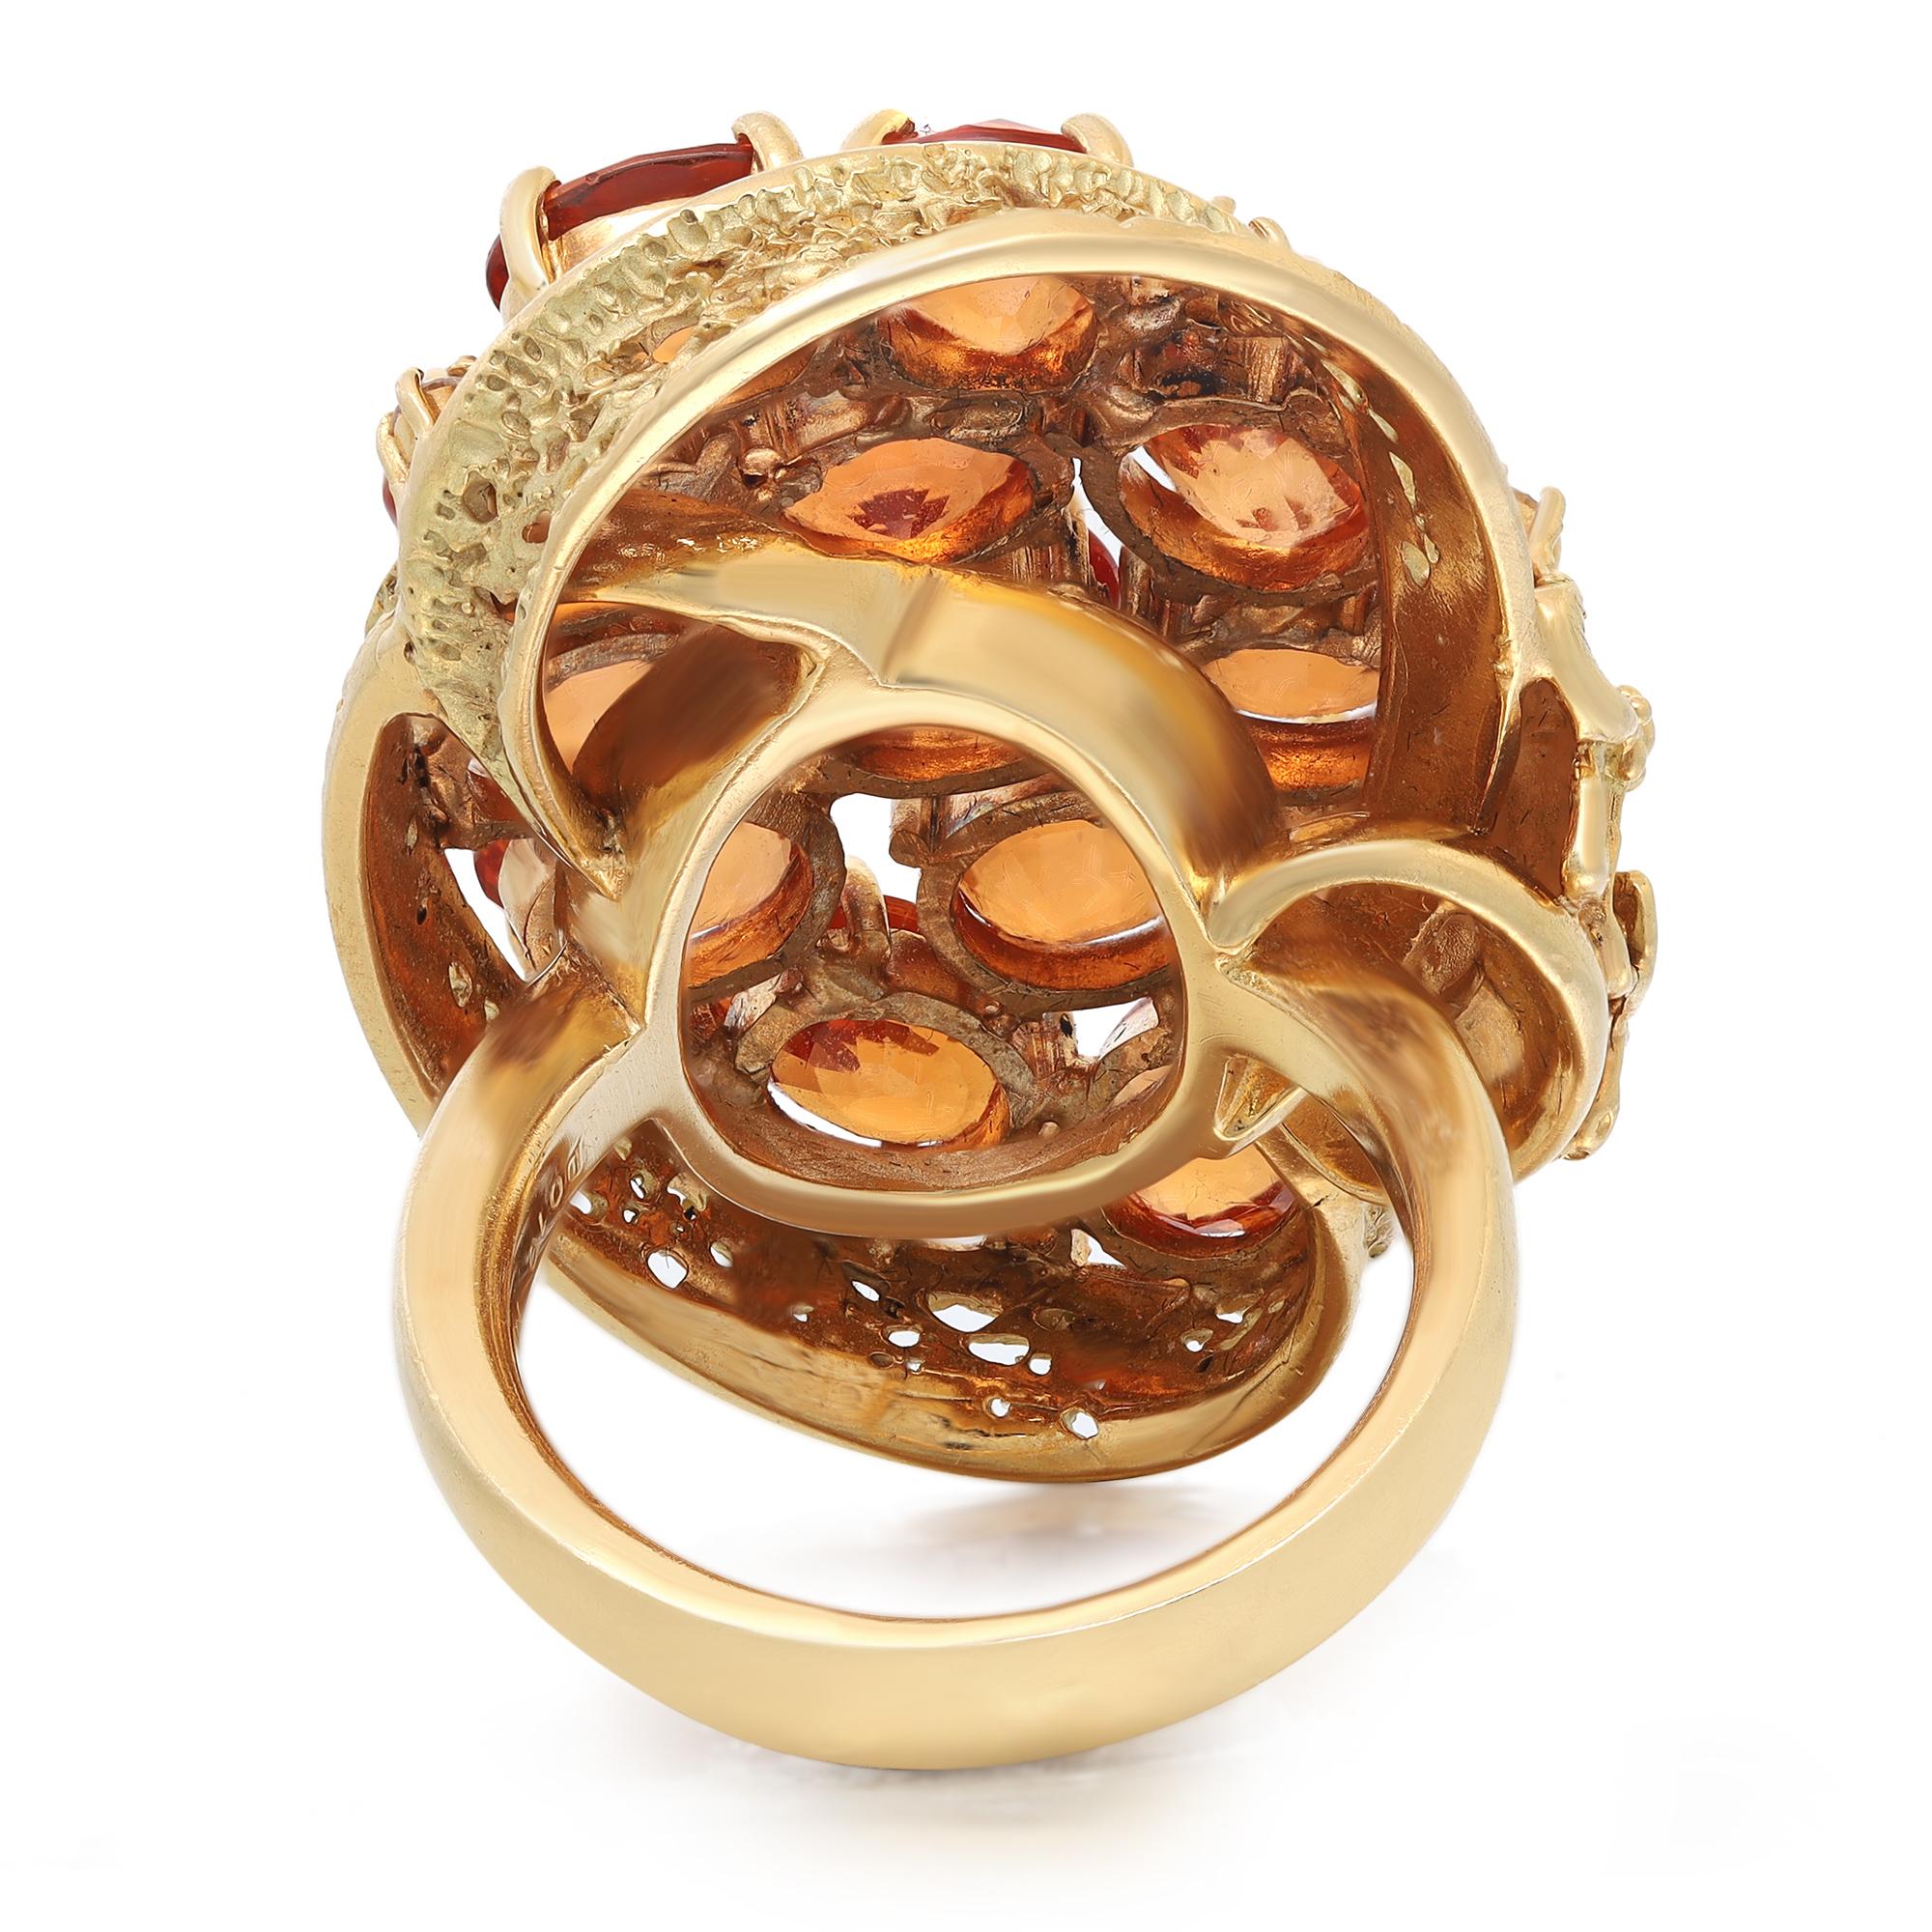 This stunning cocktail ring comes with a flashy statement look. A must have in your jewelry collection. The ring is crafted in 18K yellow gold. Features 13 prong set oval cut golden orange sapphires weighing 17.05 carats with 5 side round brilliant